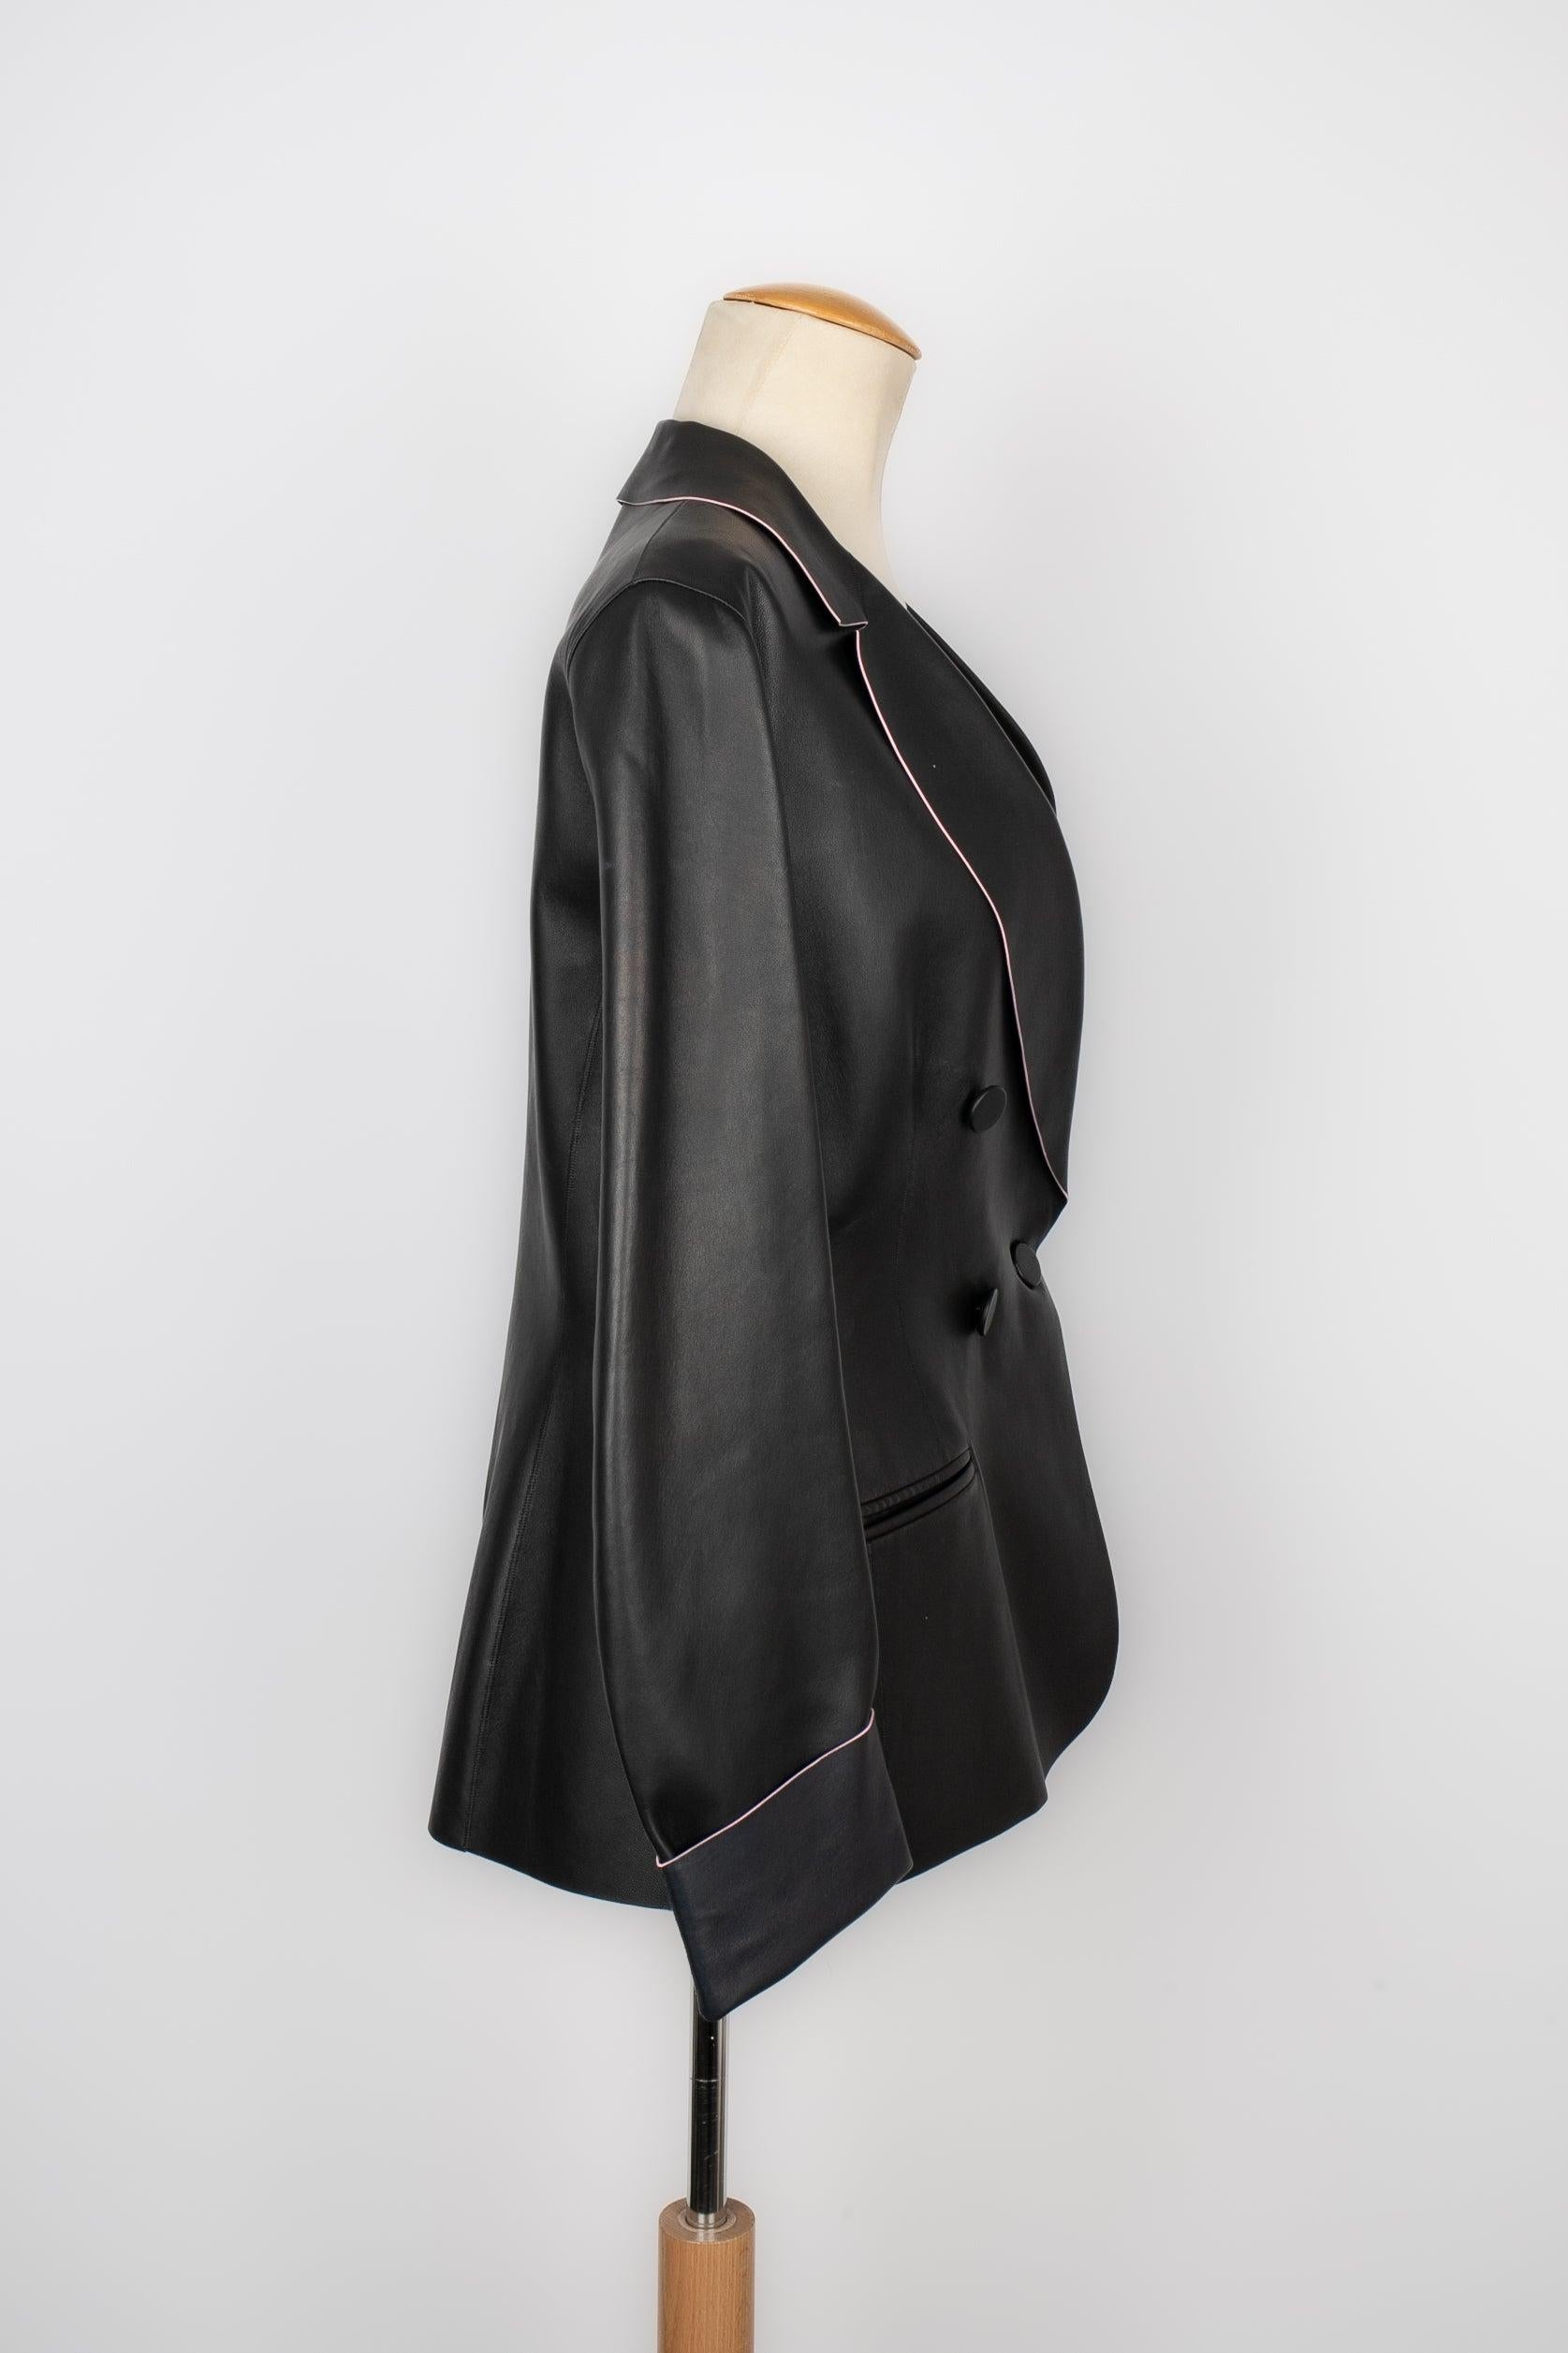 Dior - (Made in Italy) Black lamb leather jacket with pink edges and a navy blue lining. 42FR size indicated.

Additional information:
Condition: Very good condition
Dimensions: Shoulder width: 40 cm - Chest: 48 cm - Waist: 41 cm - Sleeve length: 58